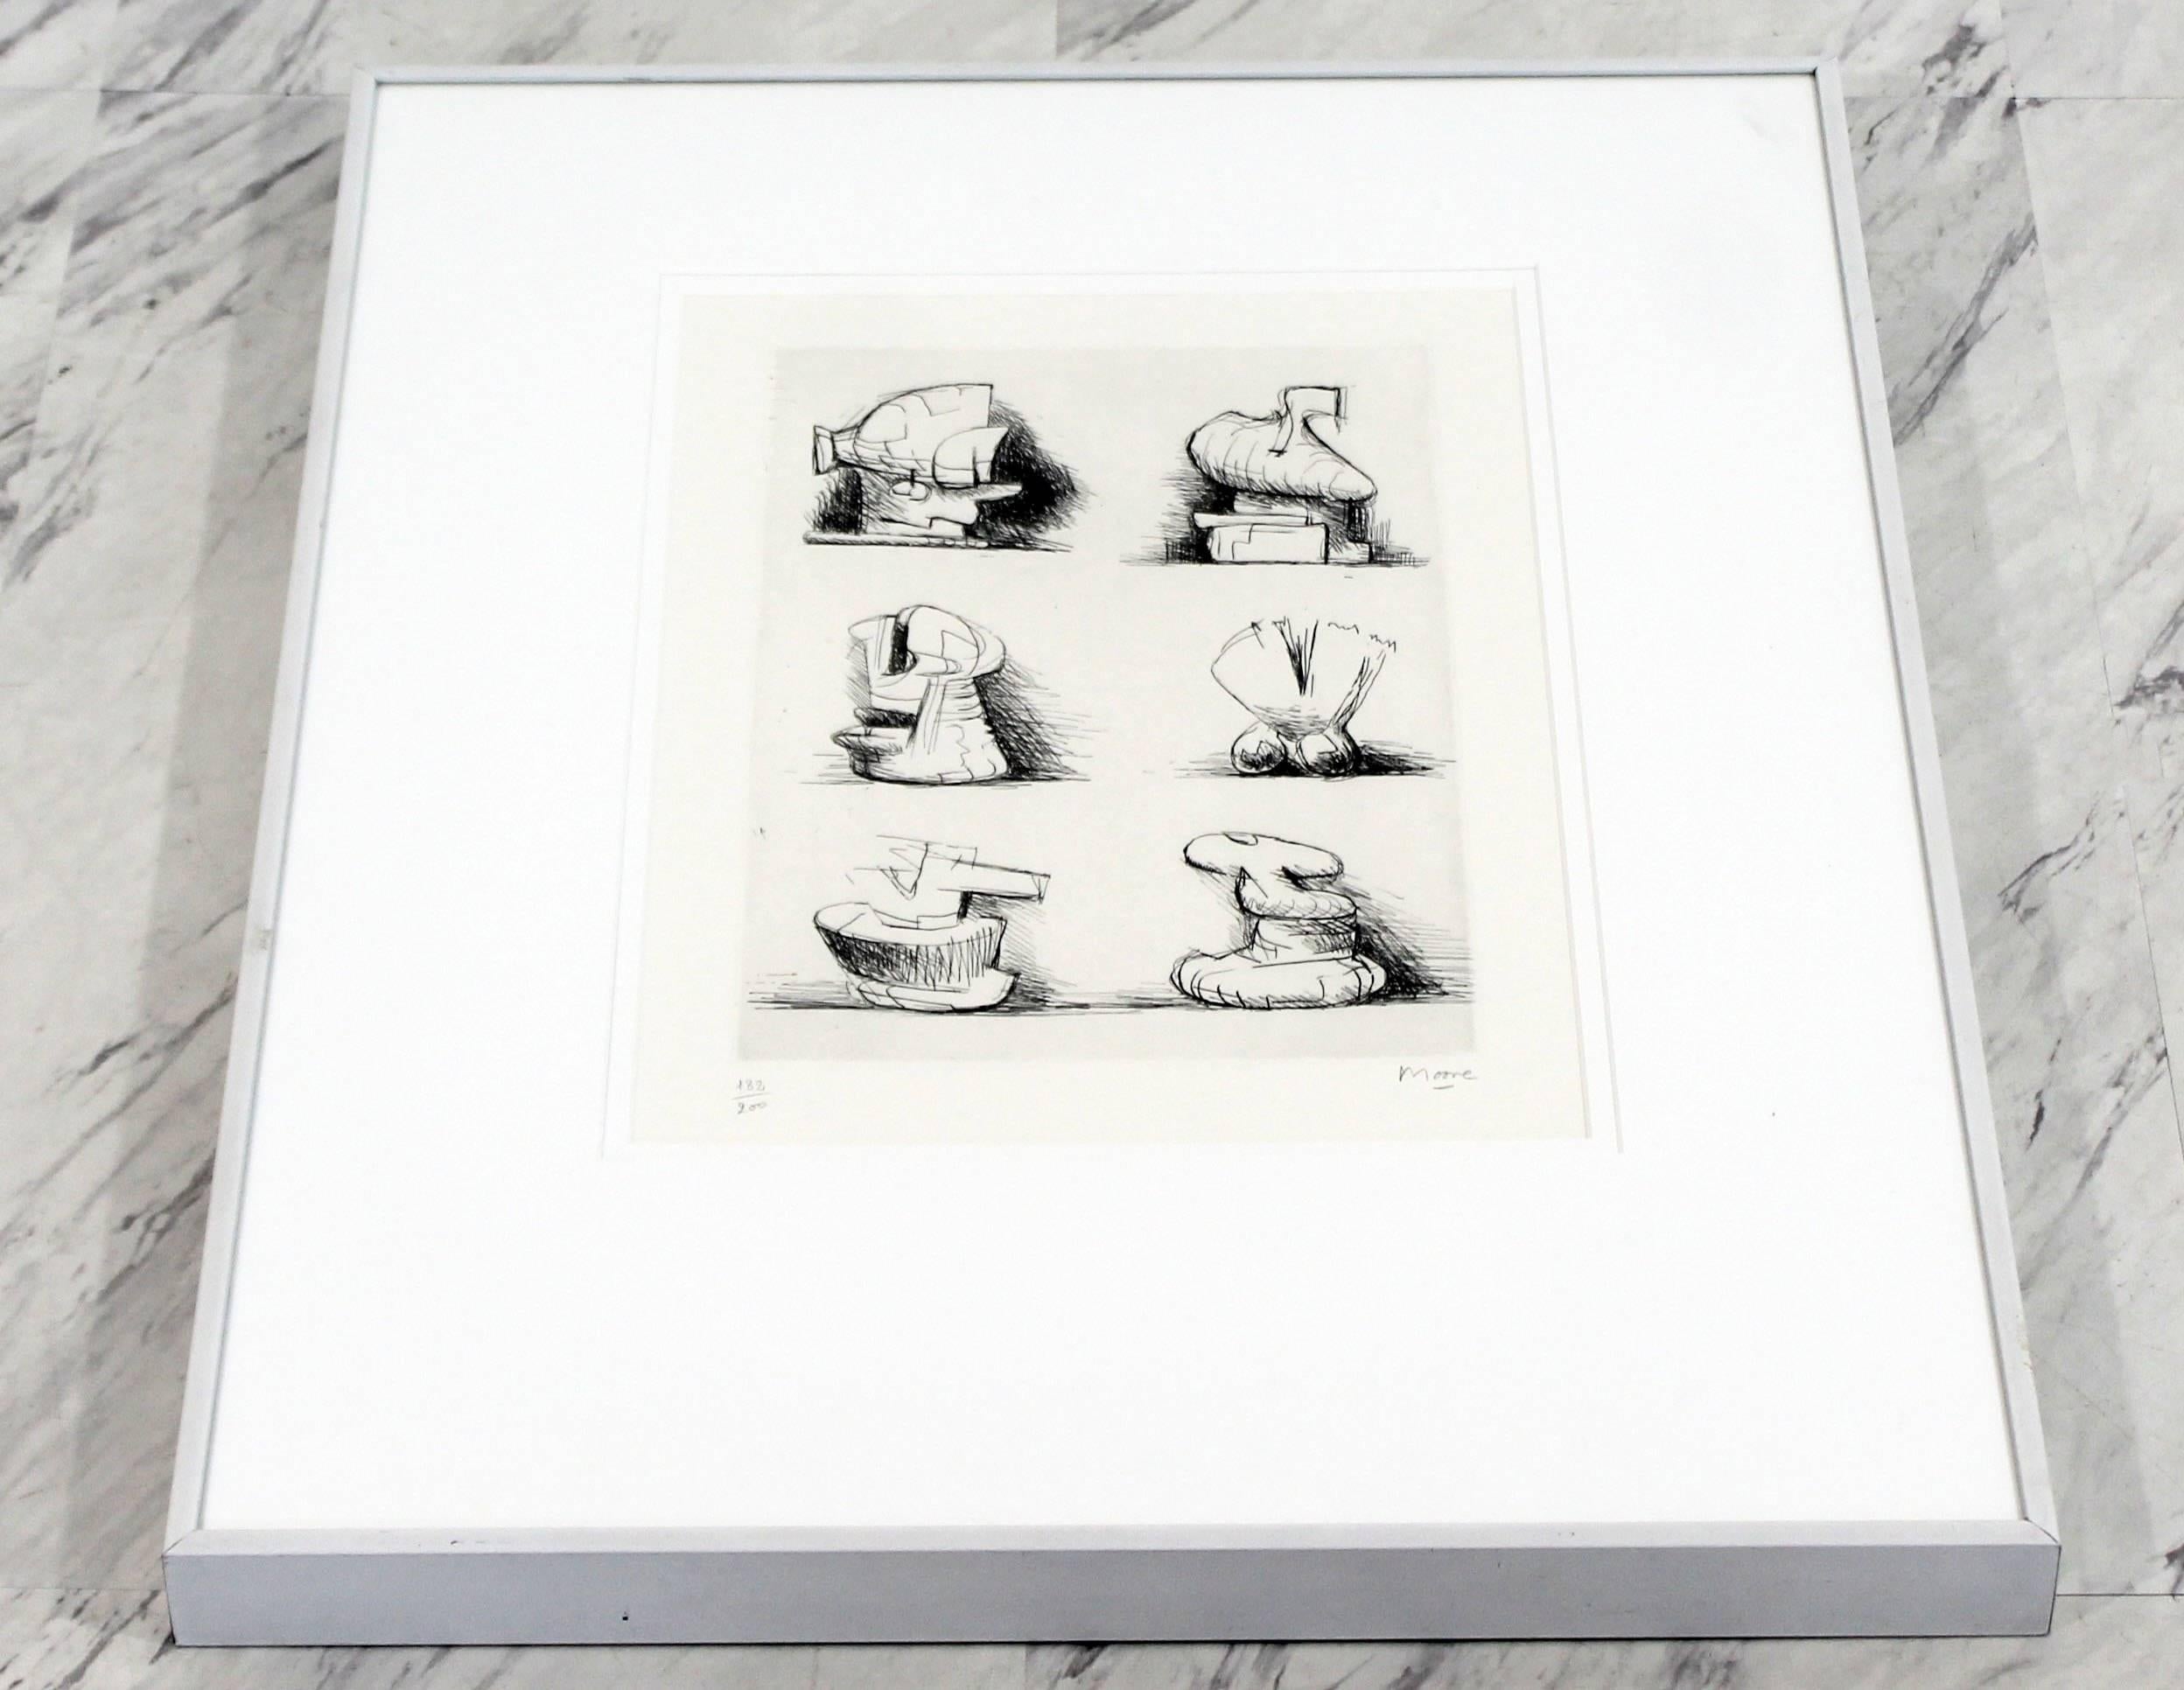 Woven Mid-Century Modern Print Six Sculpture Motives Signed by Henry Moore 182/200